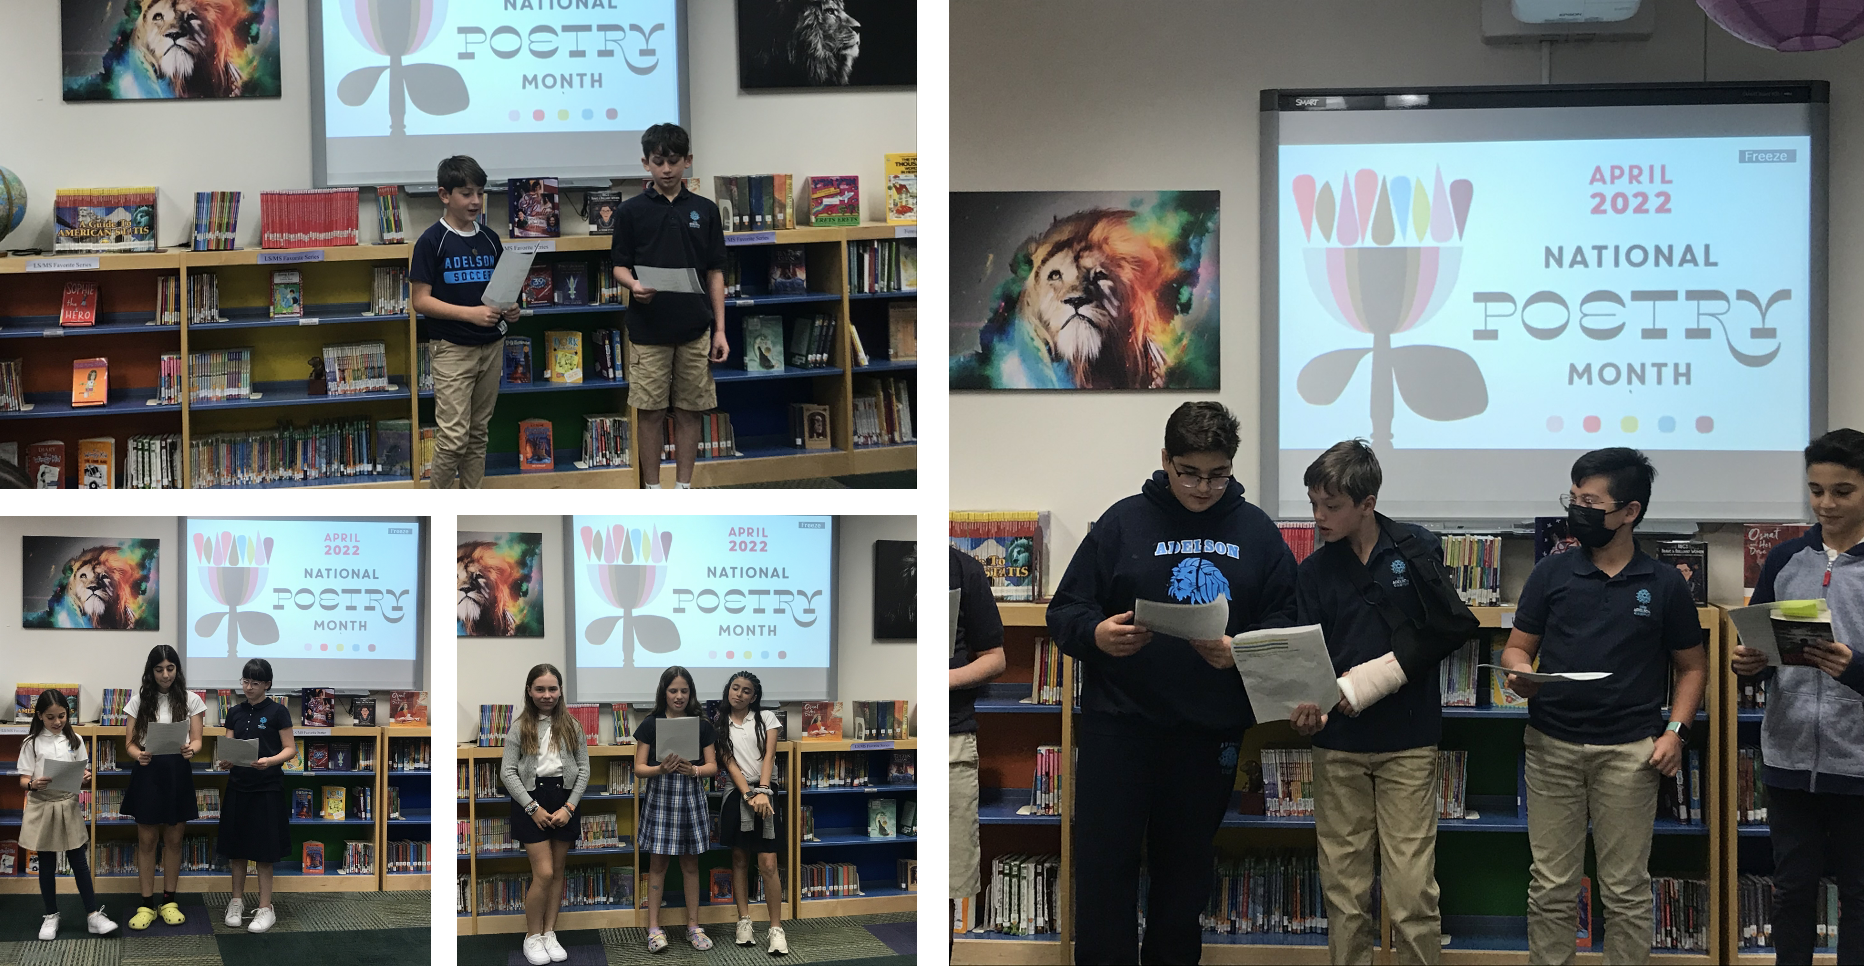 National Poetry Month 5th grade